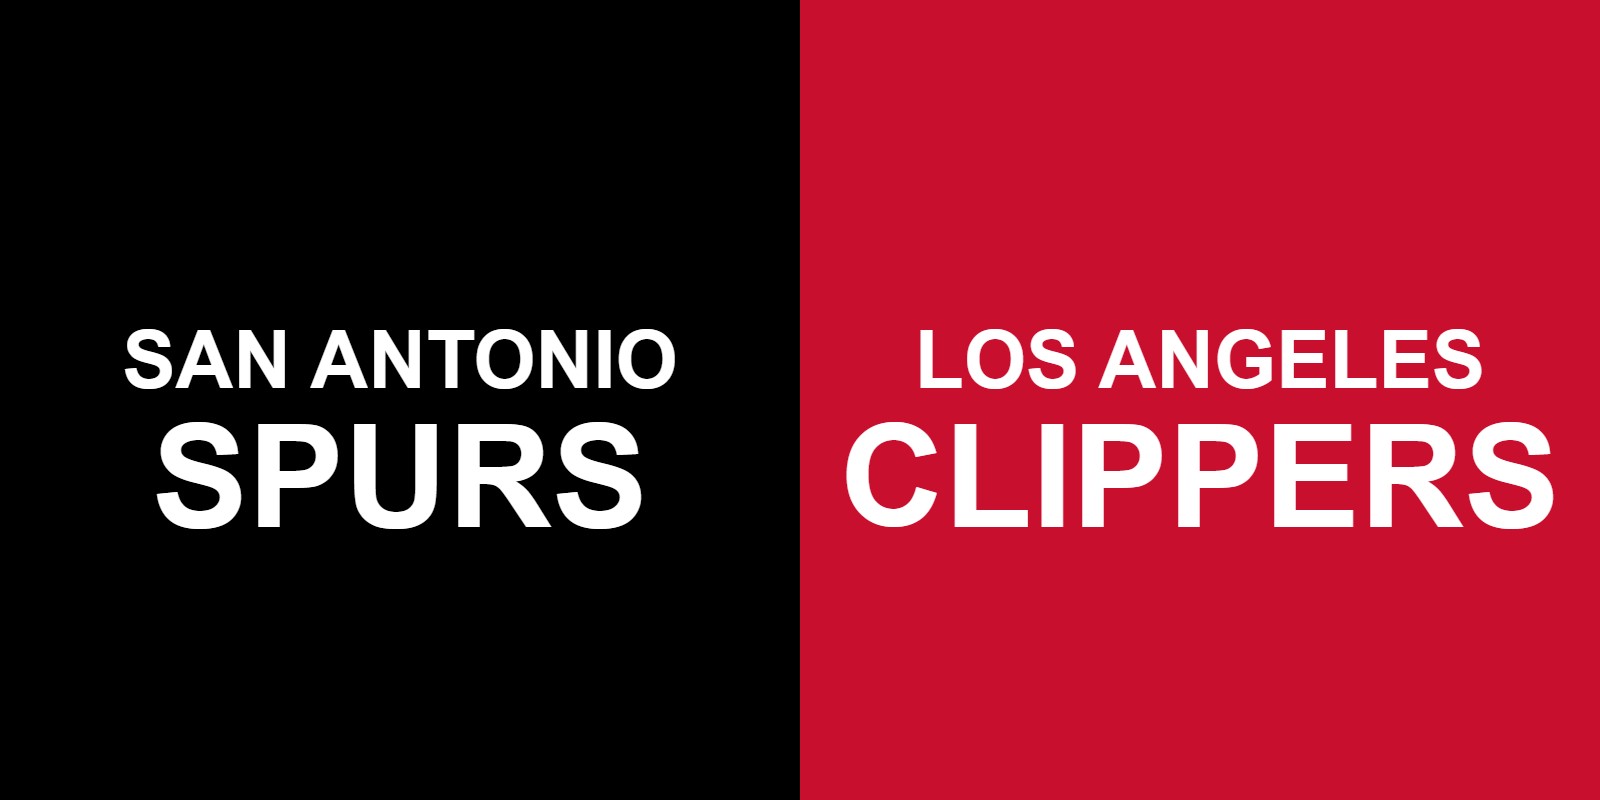 Spurs vs Clippers